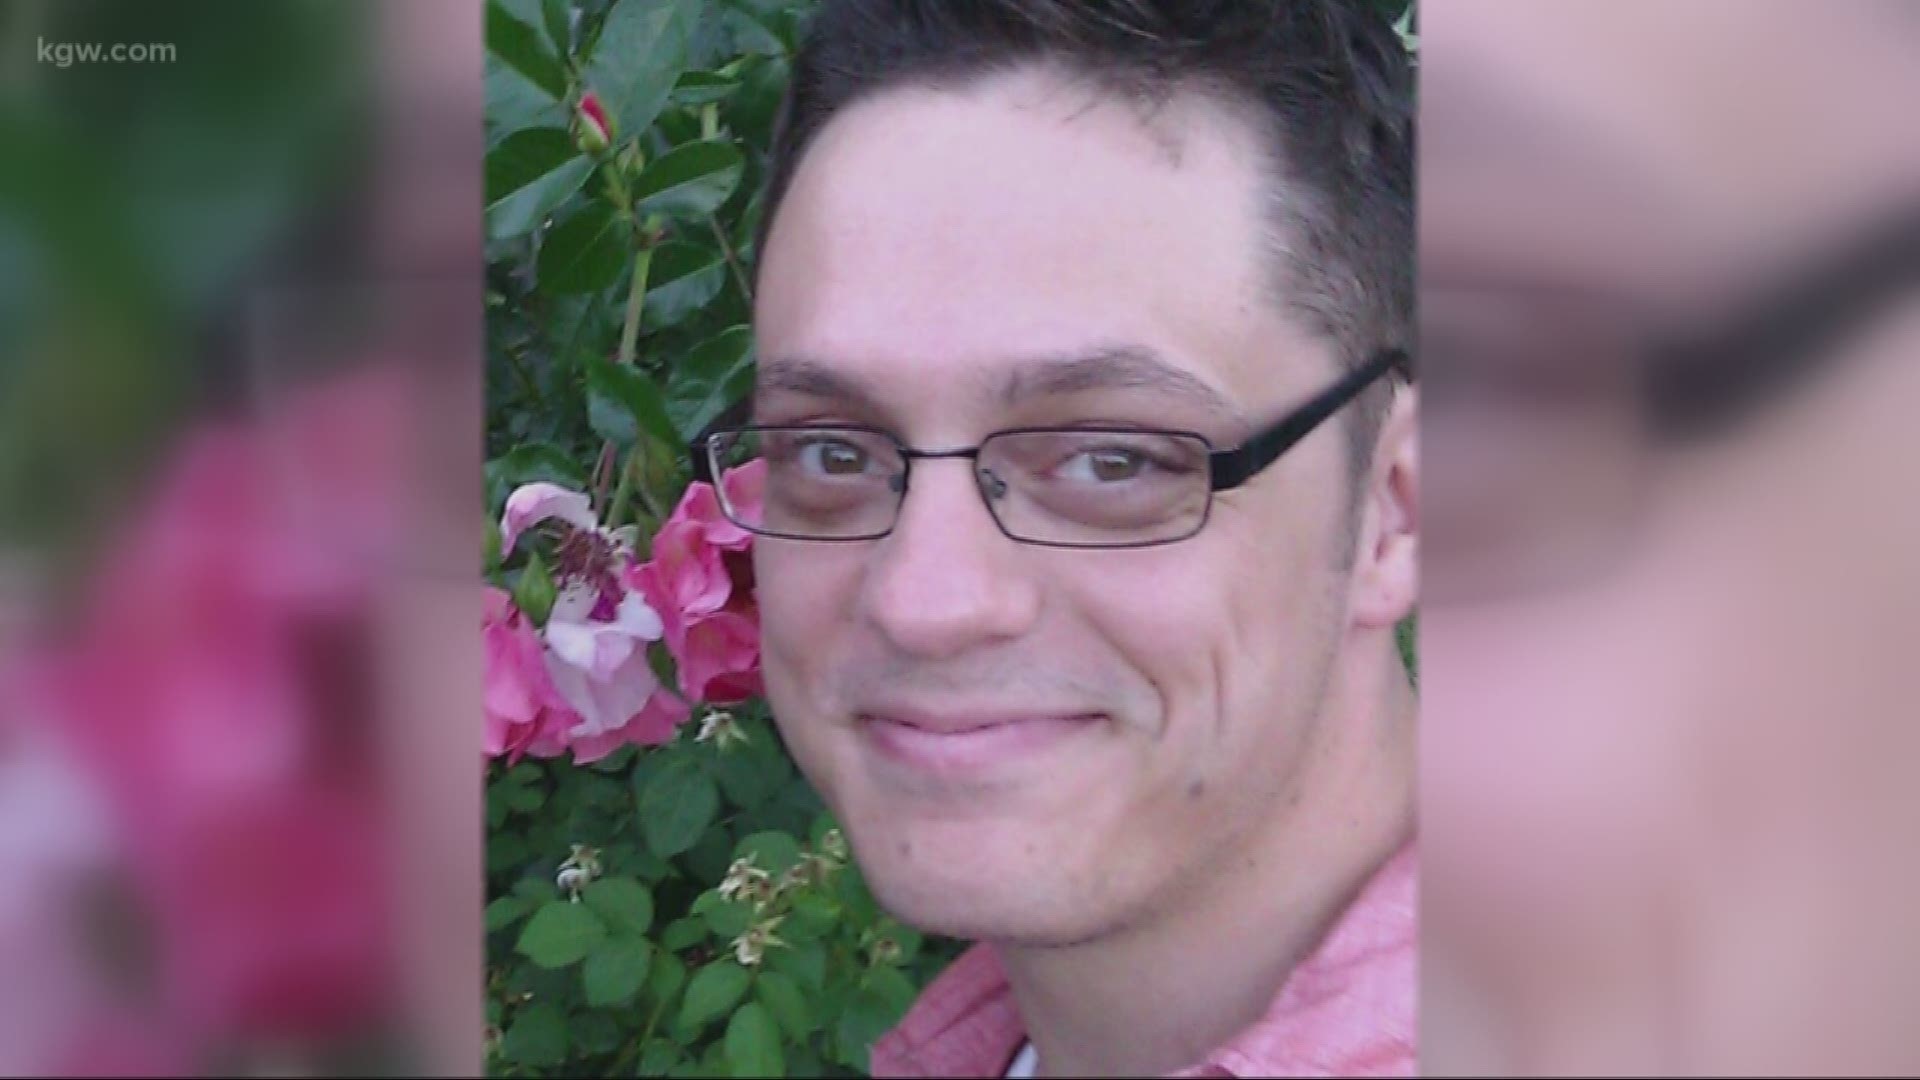 The family of Jason Barns, a 32-year-old Tigard man who has hit and killed by a drunk driver on Thursday, Nov. 15, spoke to KGW on Sunday.